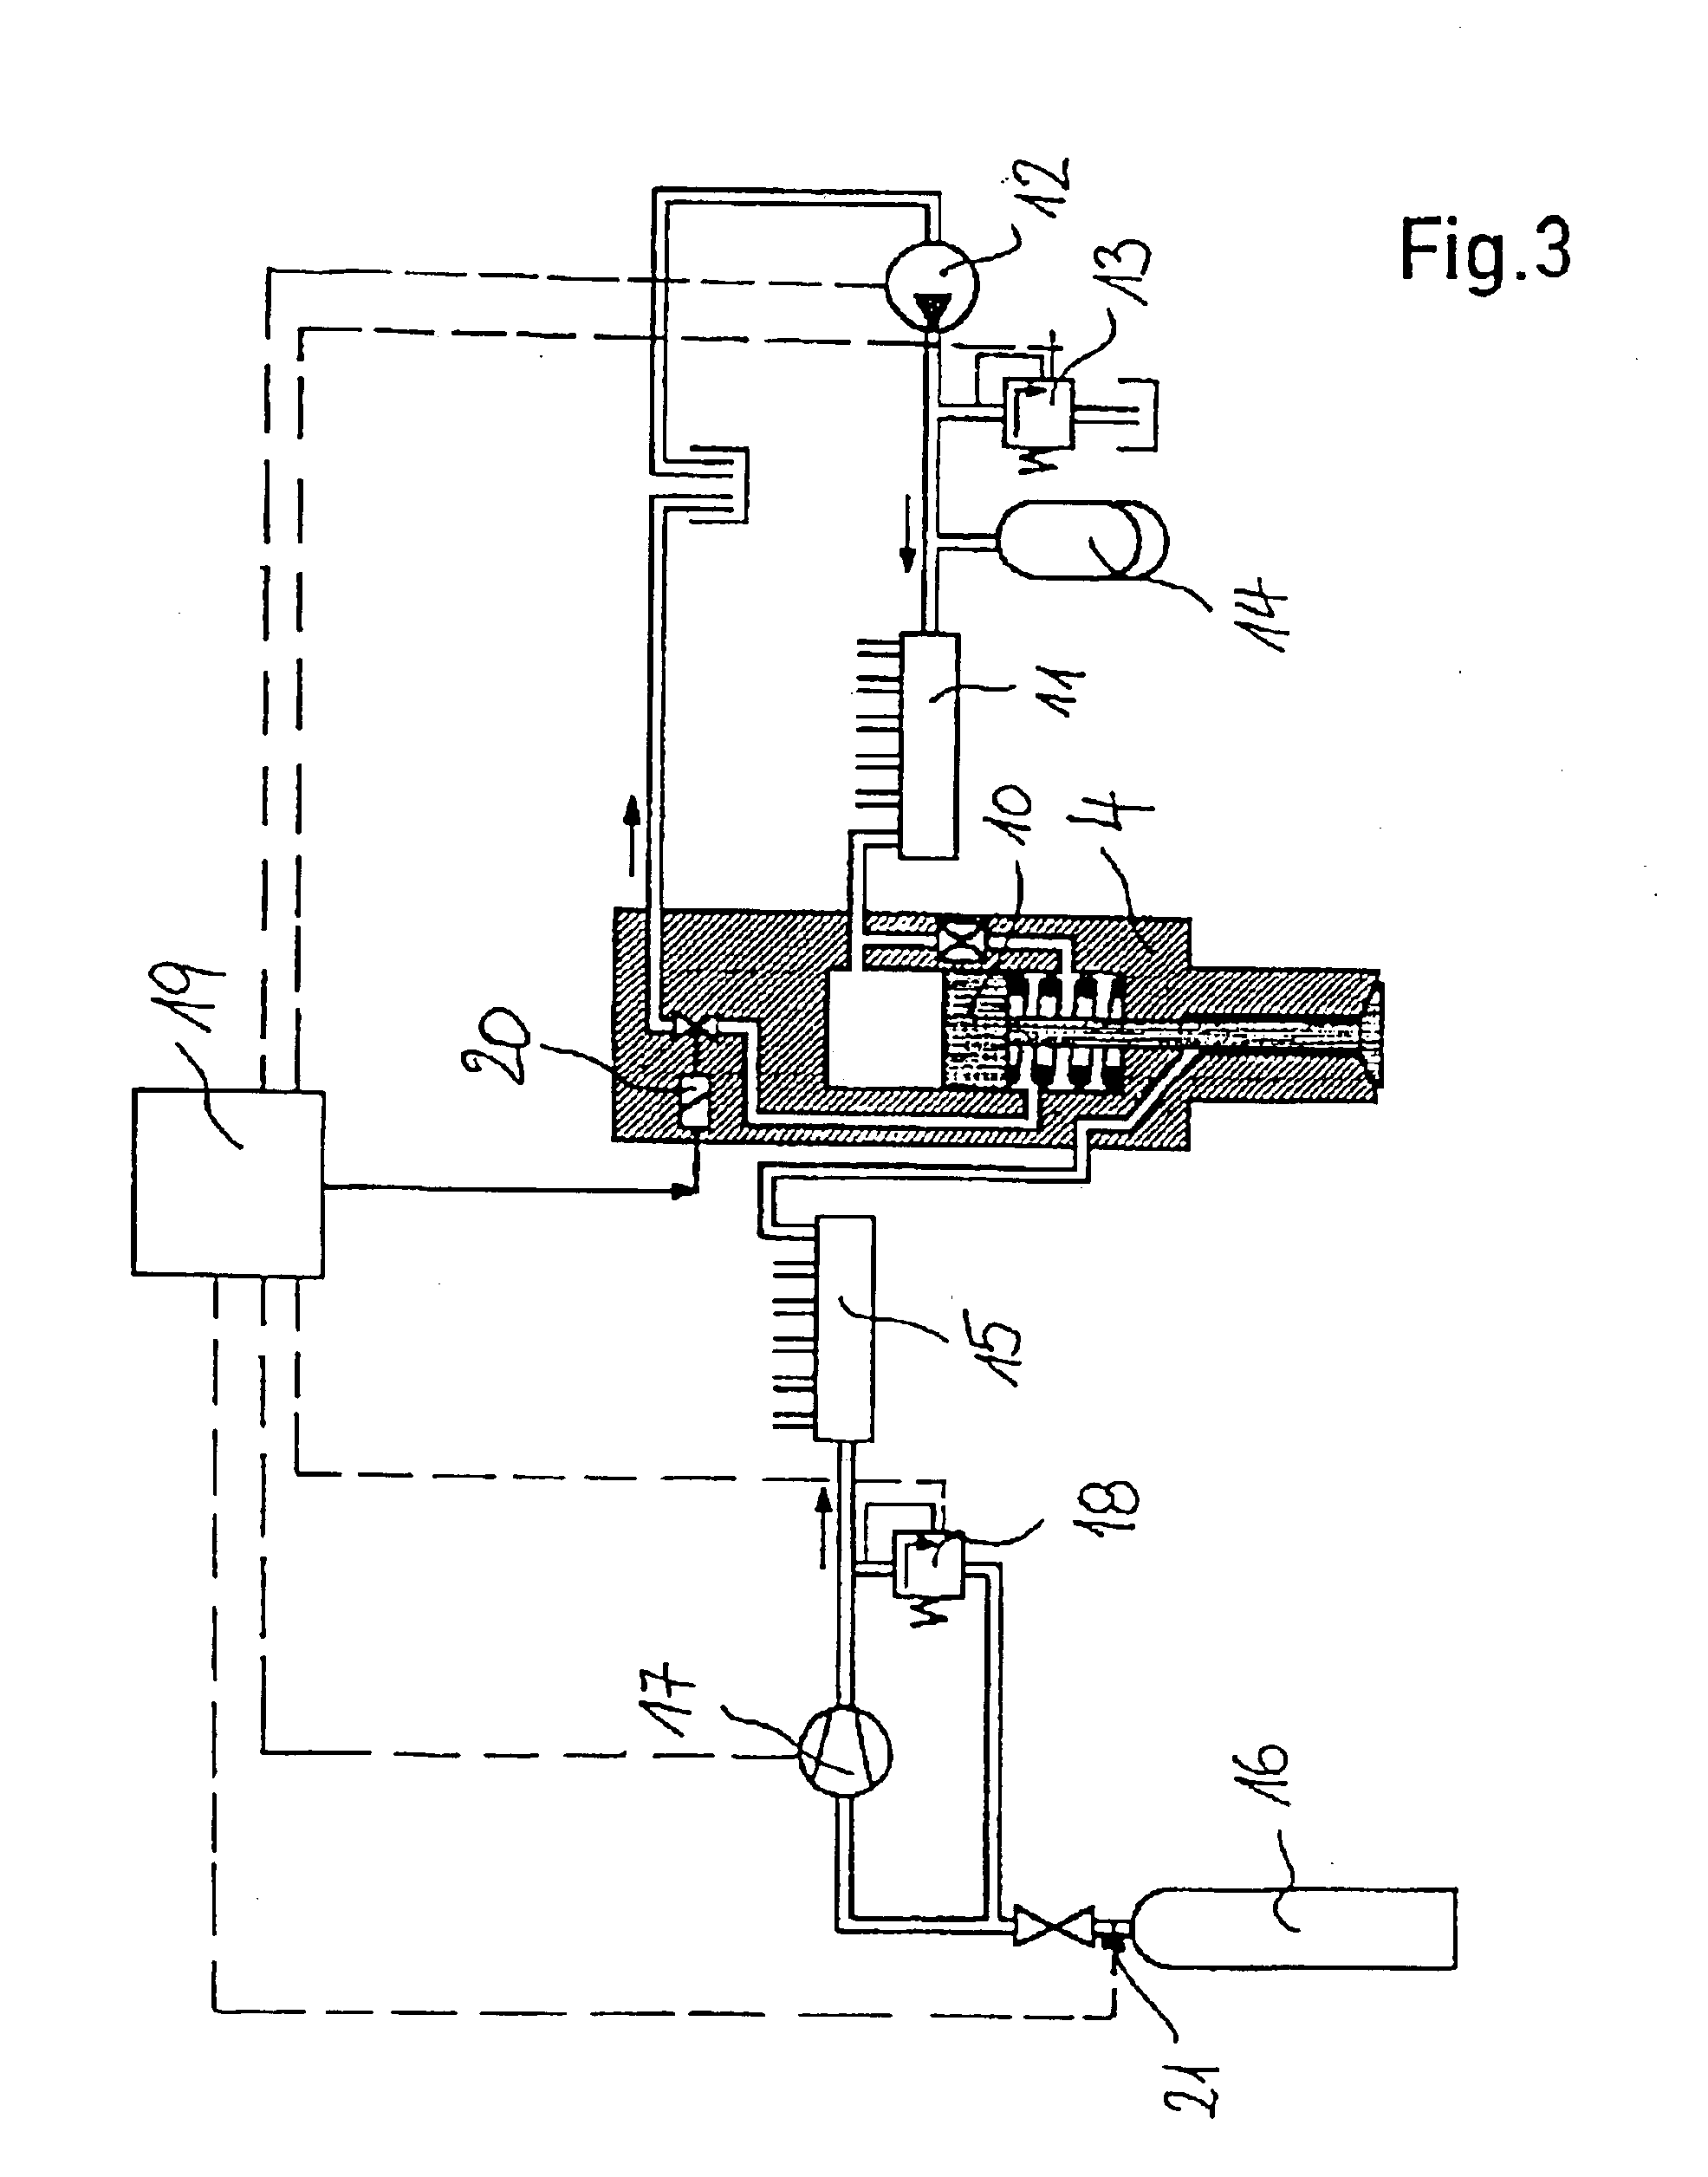 Internal combustion engine with injection of gaseous fuel